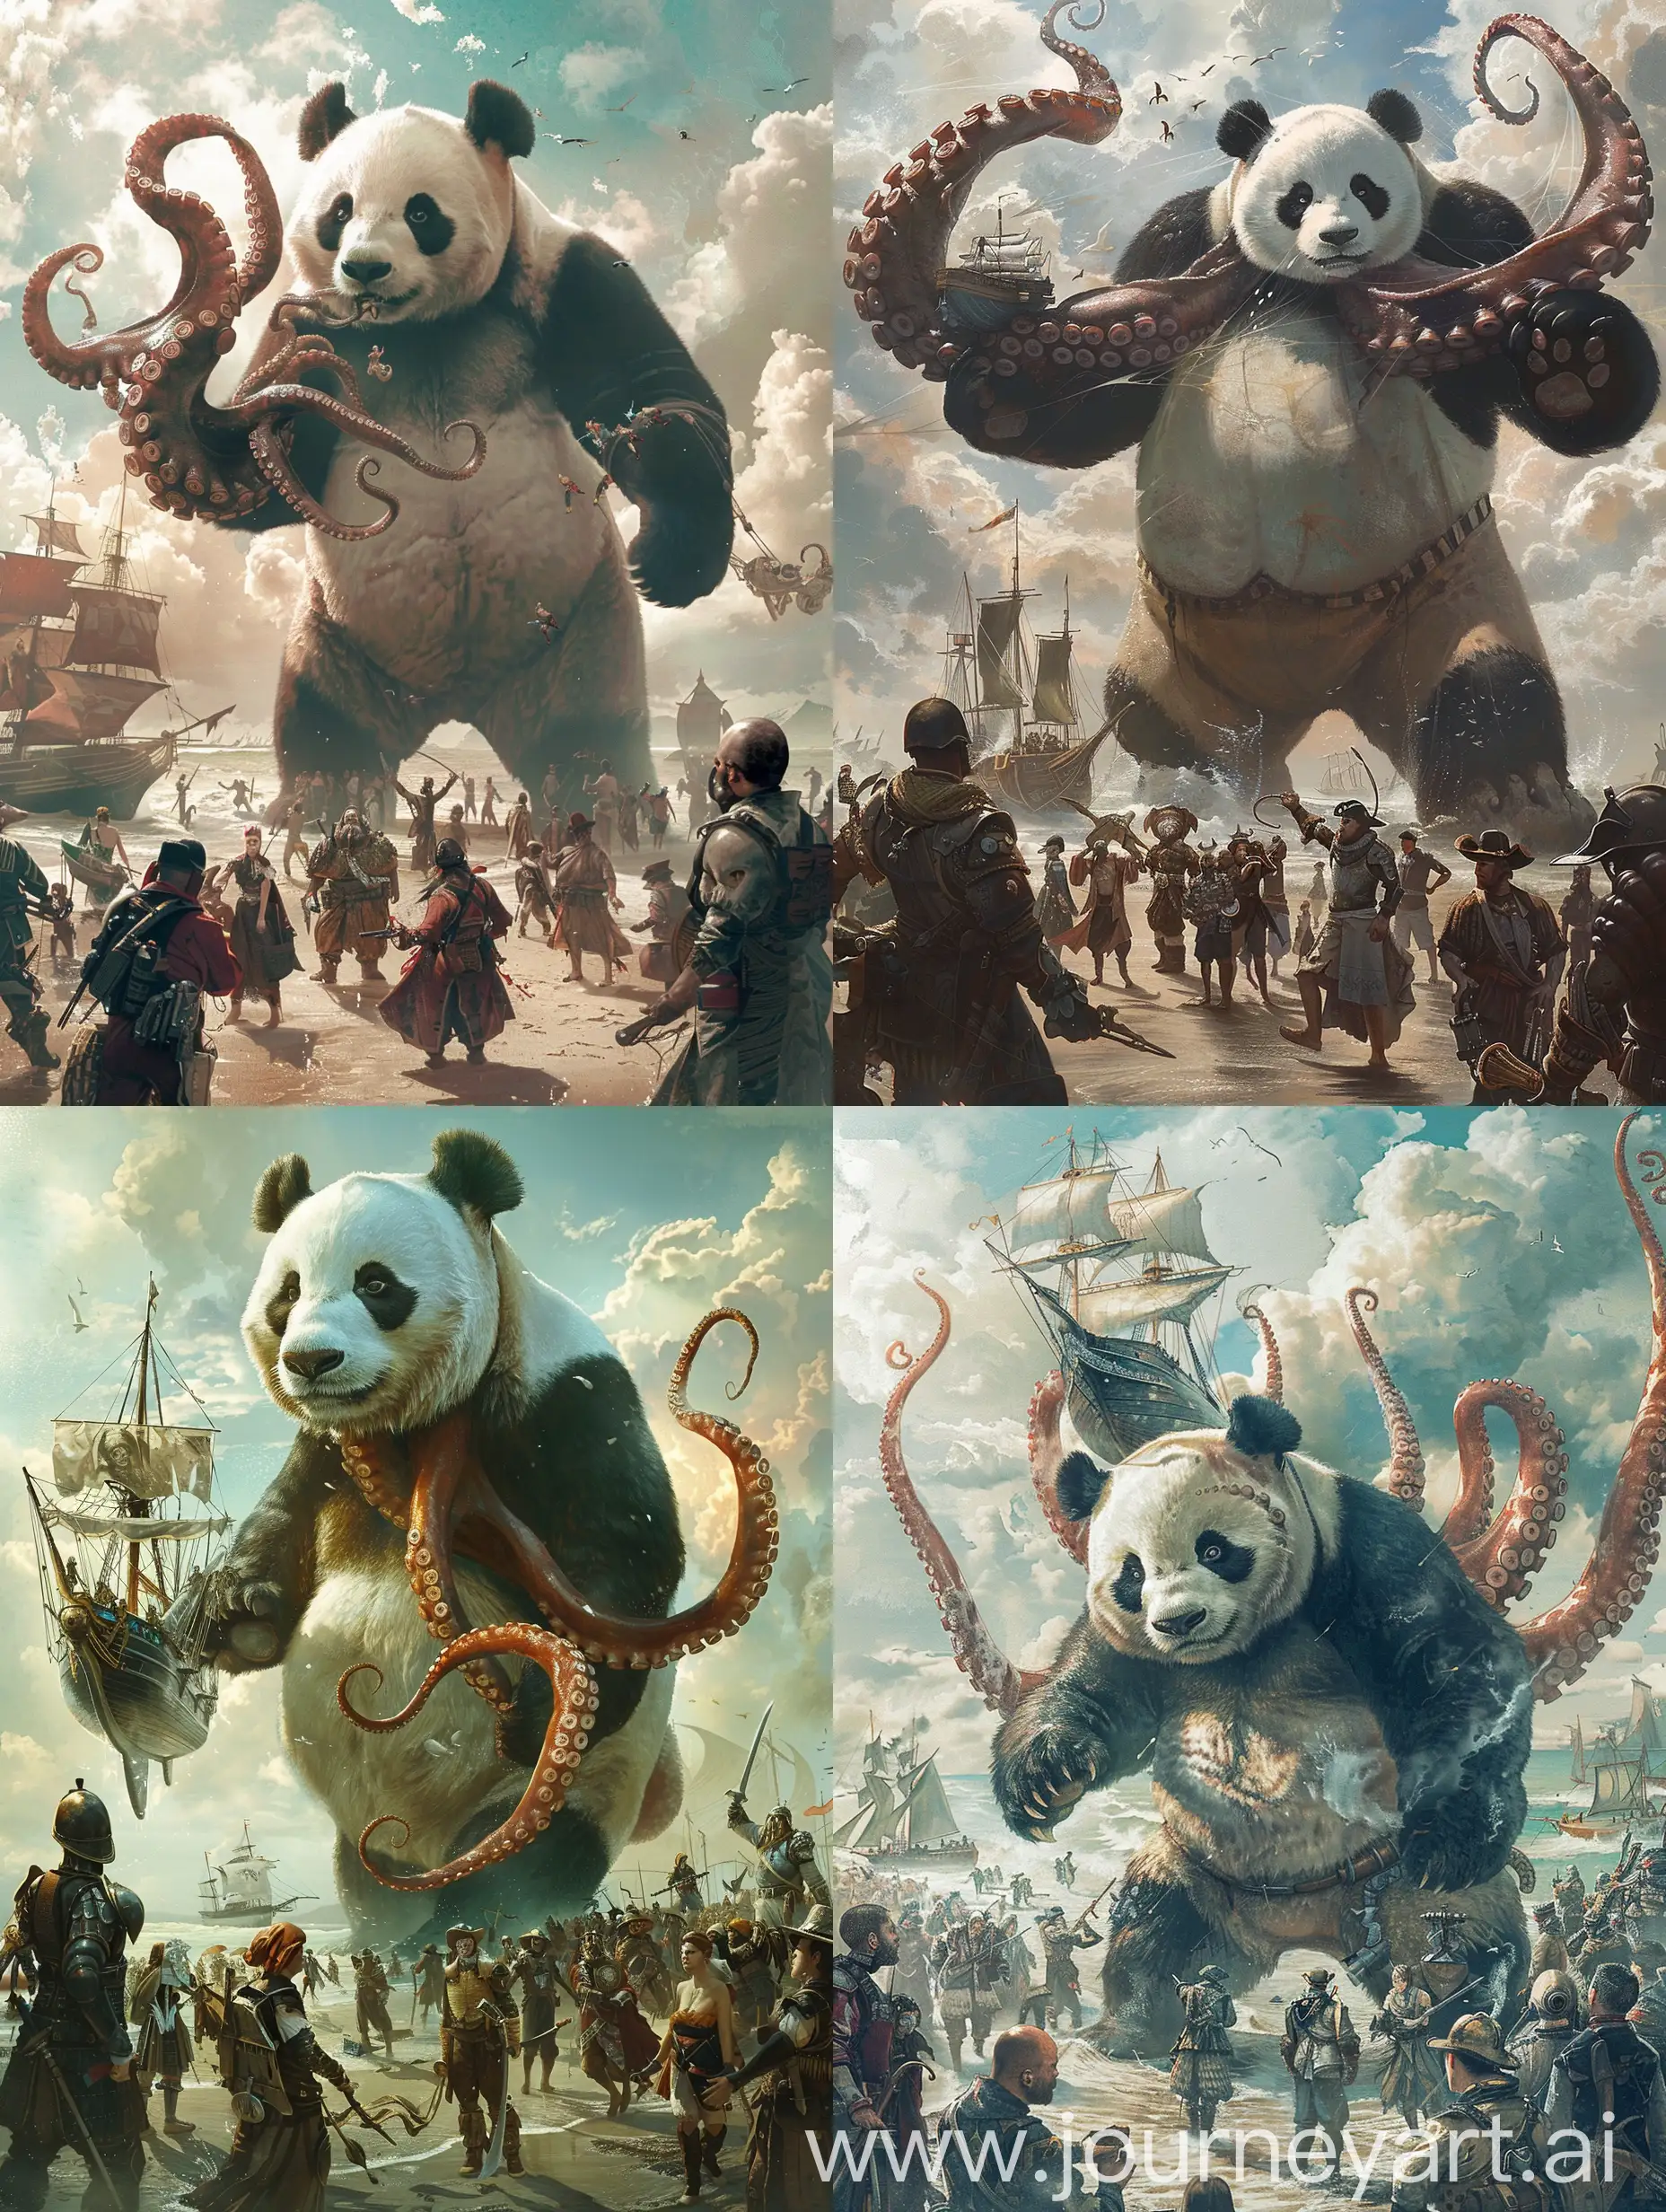 Surreal-Giant-Panda-Octopus-Holding-Ship-on-Beach-with-Mysterious-Atmosphere